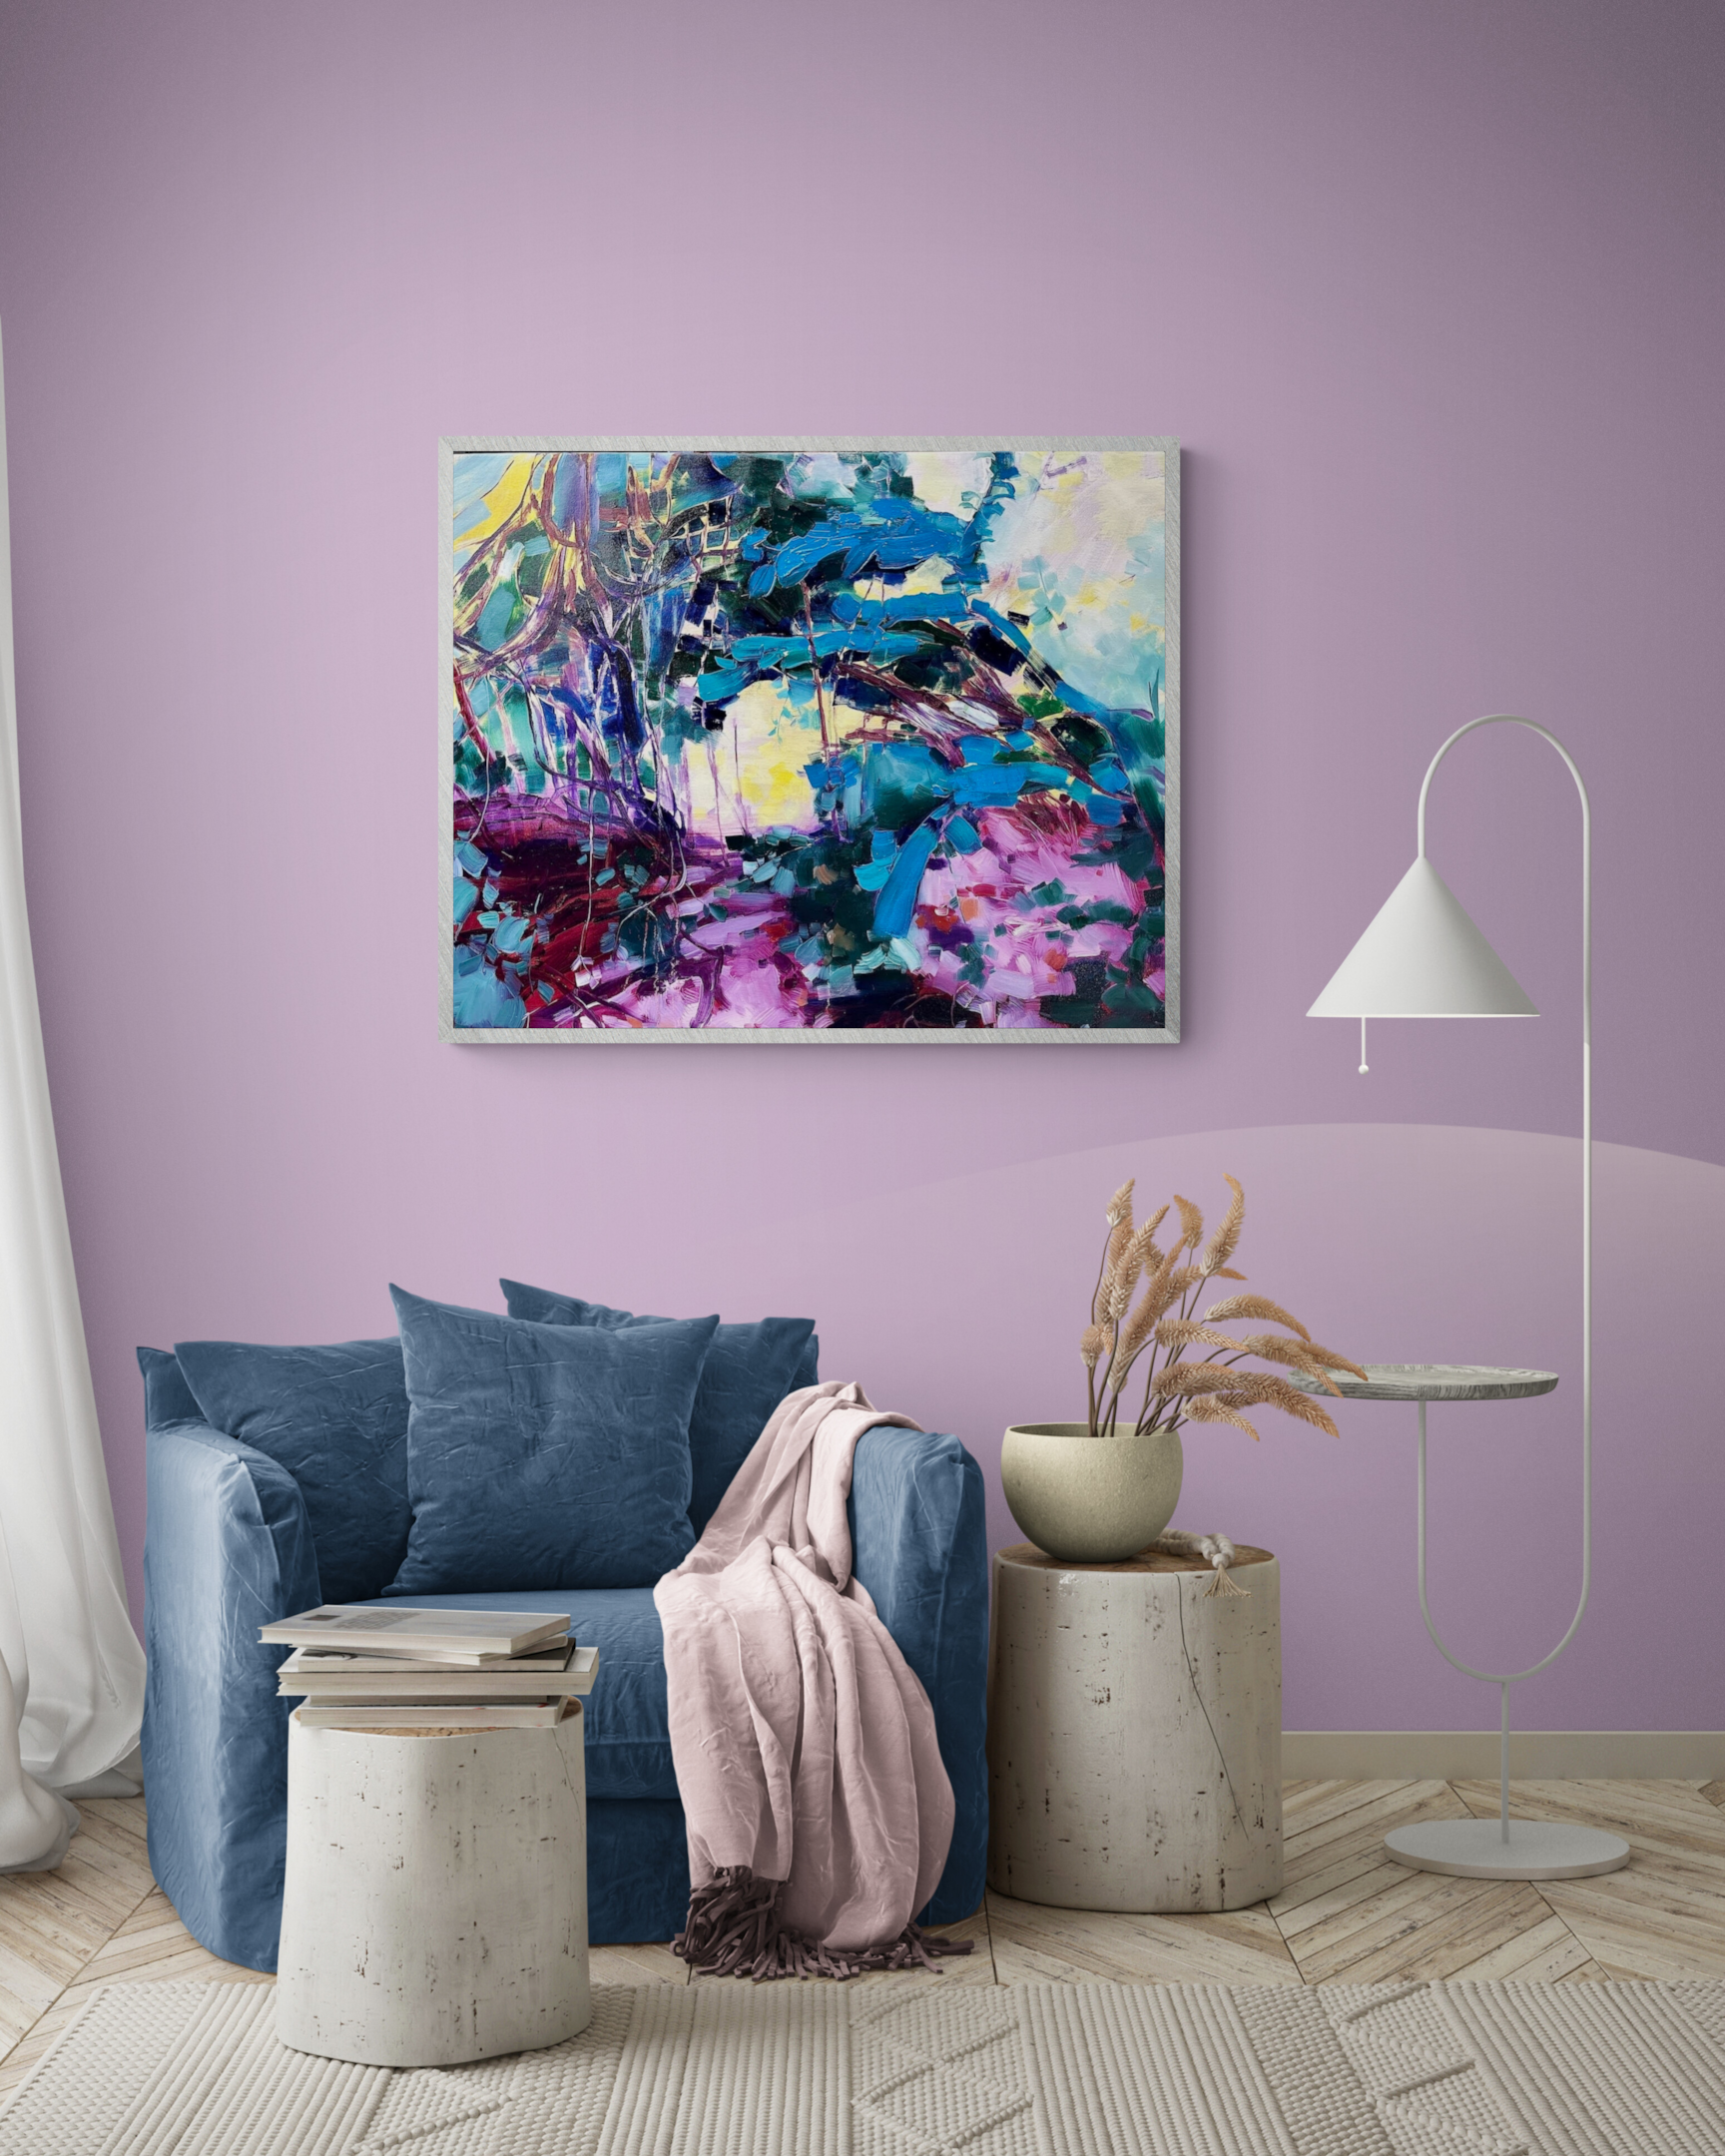 "Beautiful Blue" by artterra artist, Tina Ding, is the inspiration to this interior space's vibrant colour and close composition.